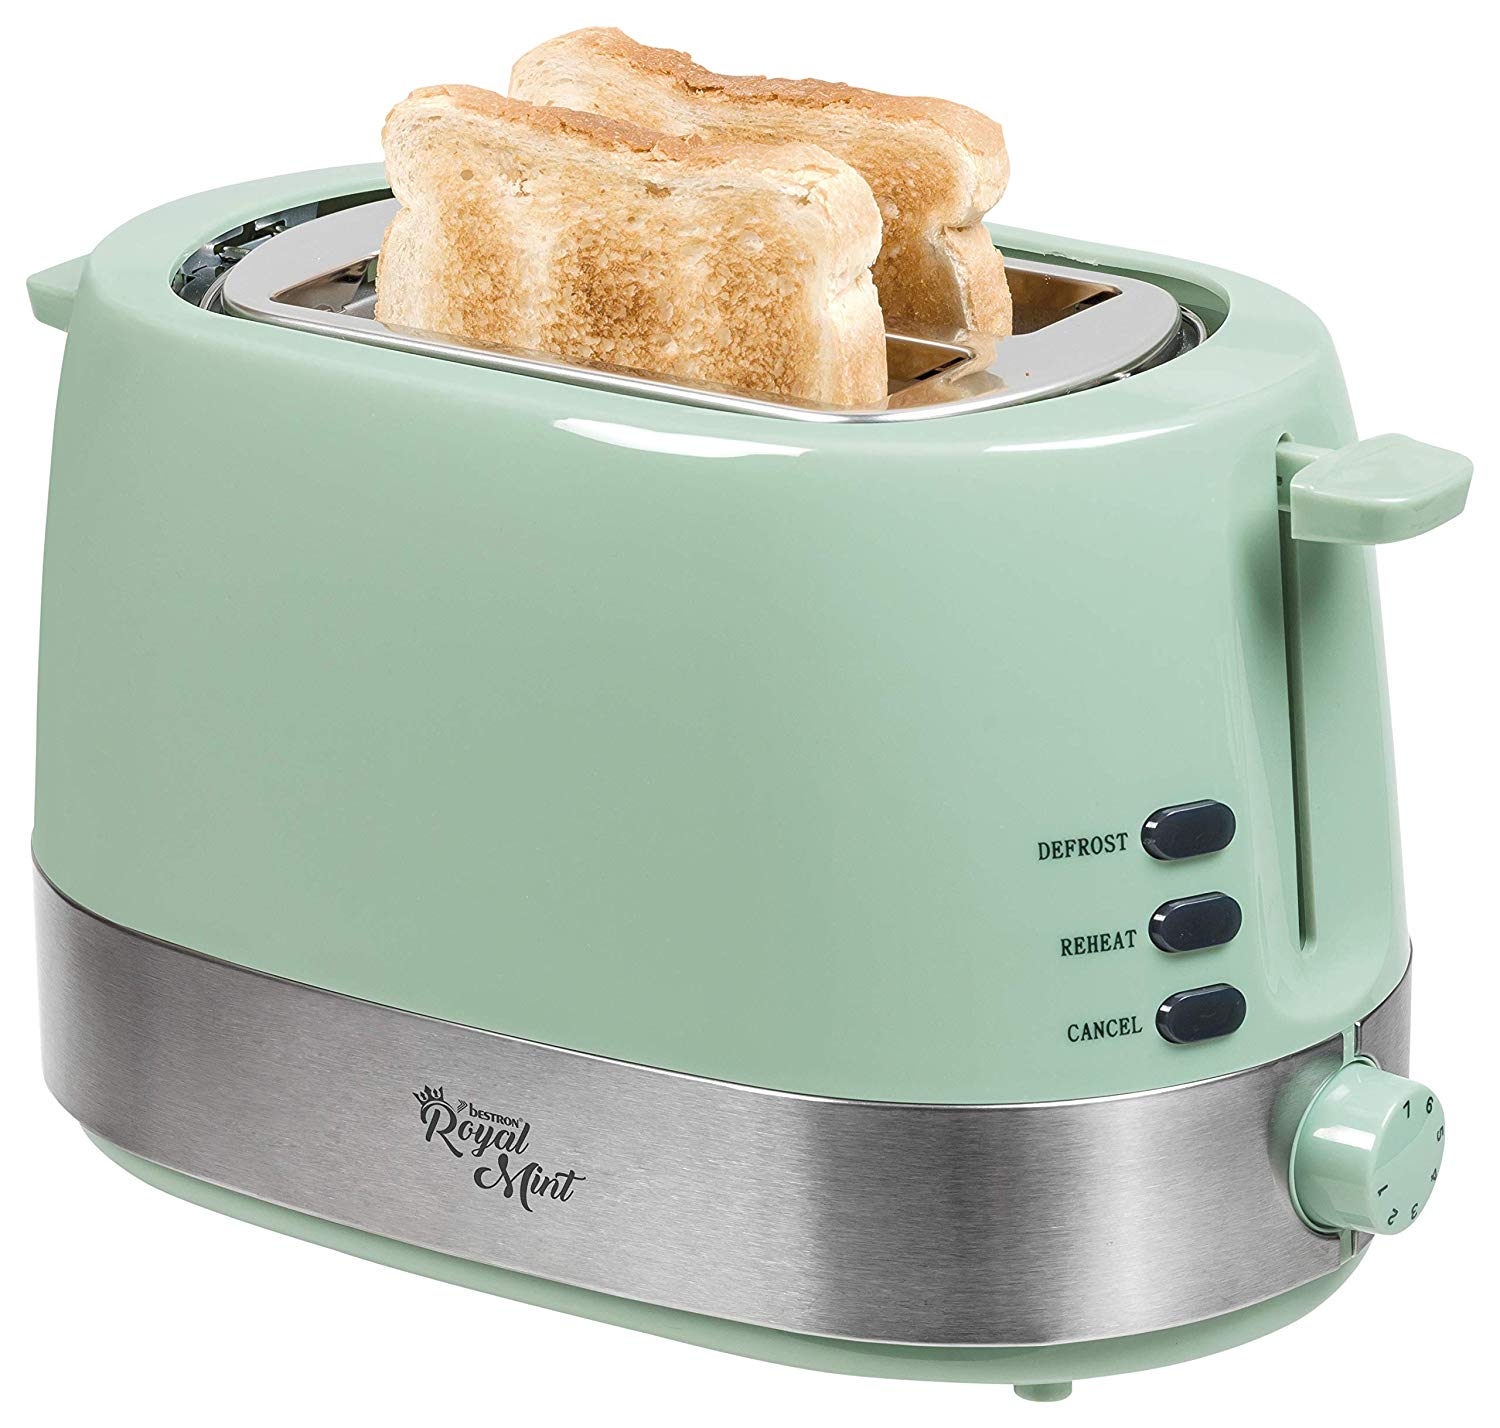 Bestron Toaster Ats1000M, Mint/Stainless Steel